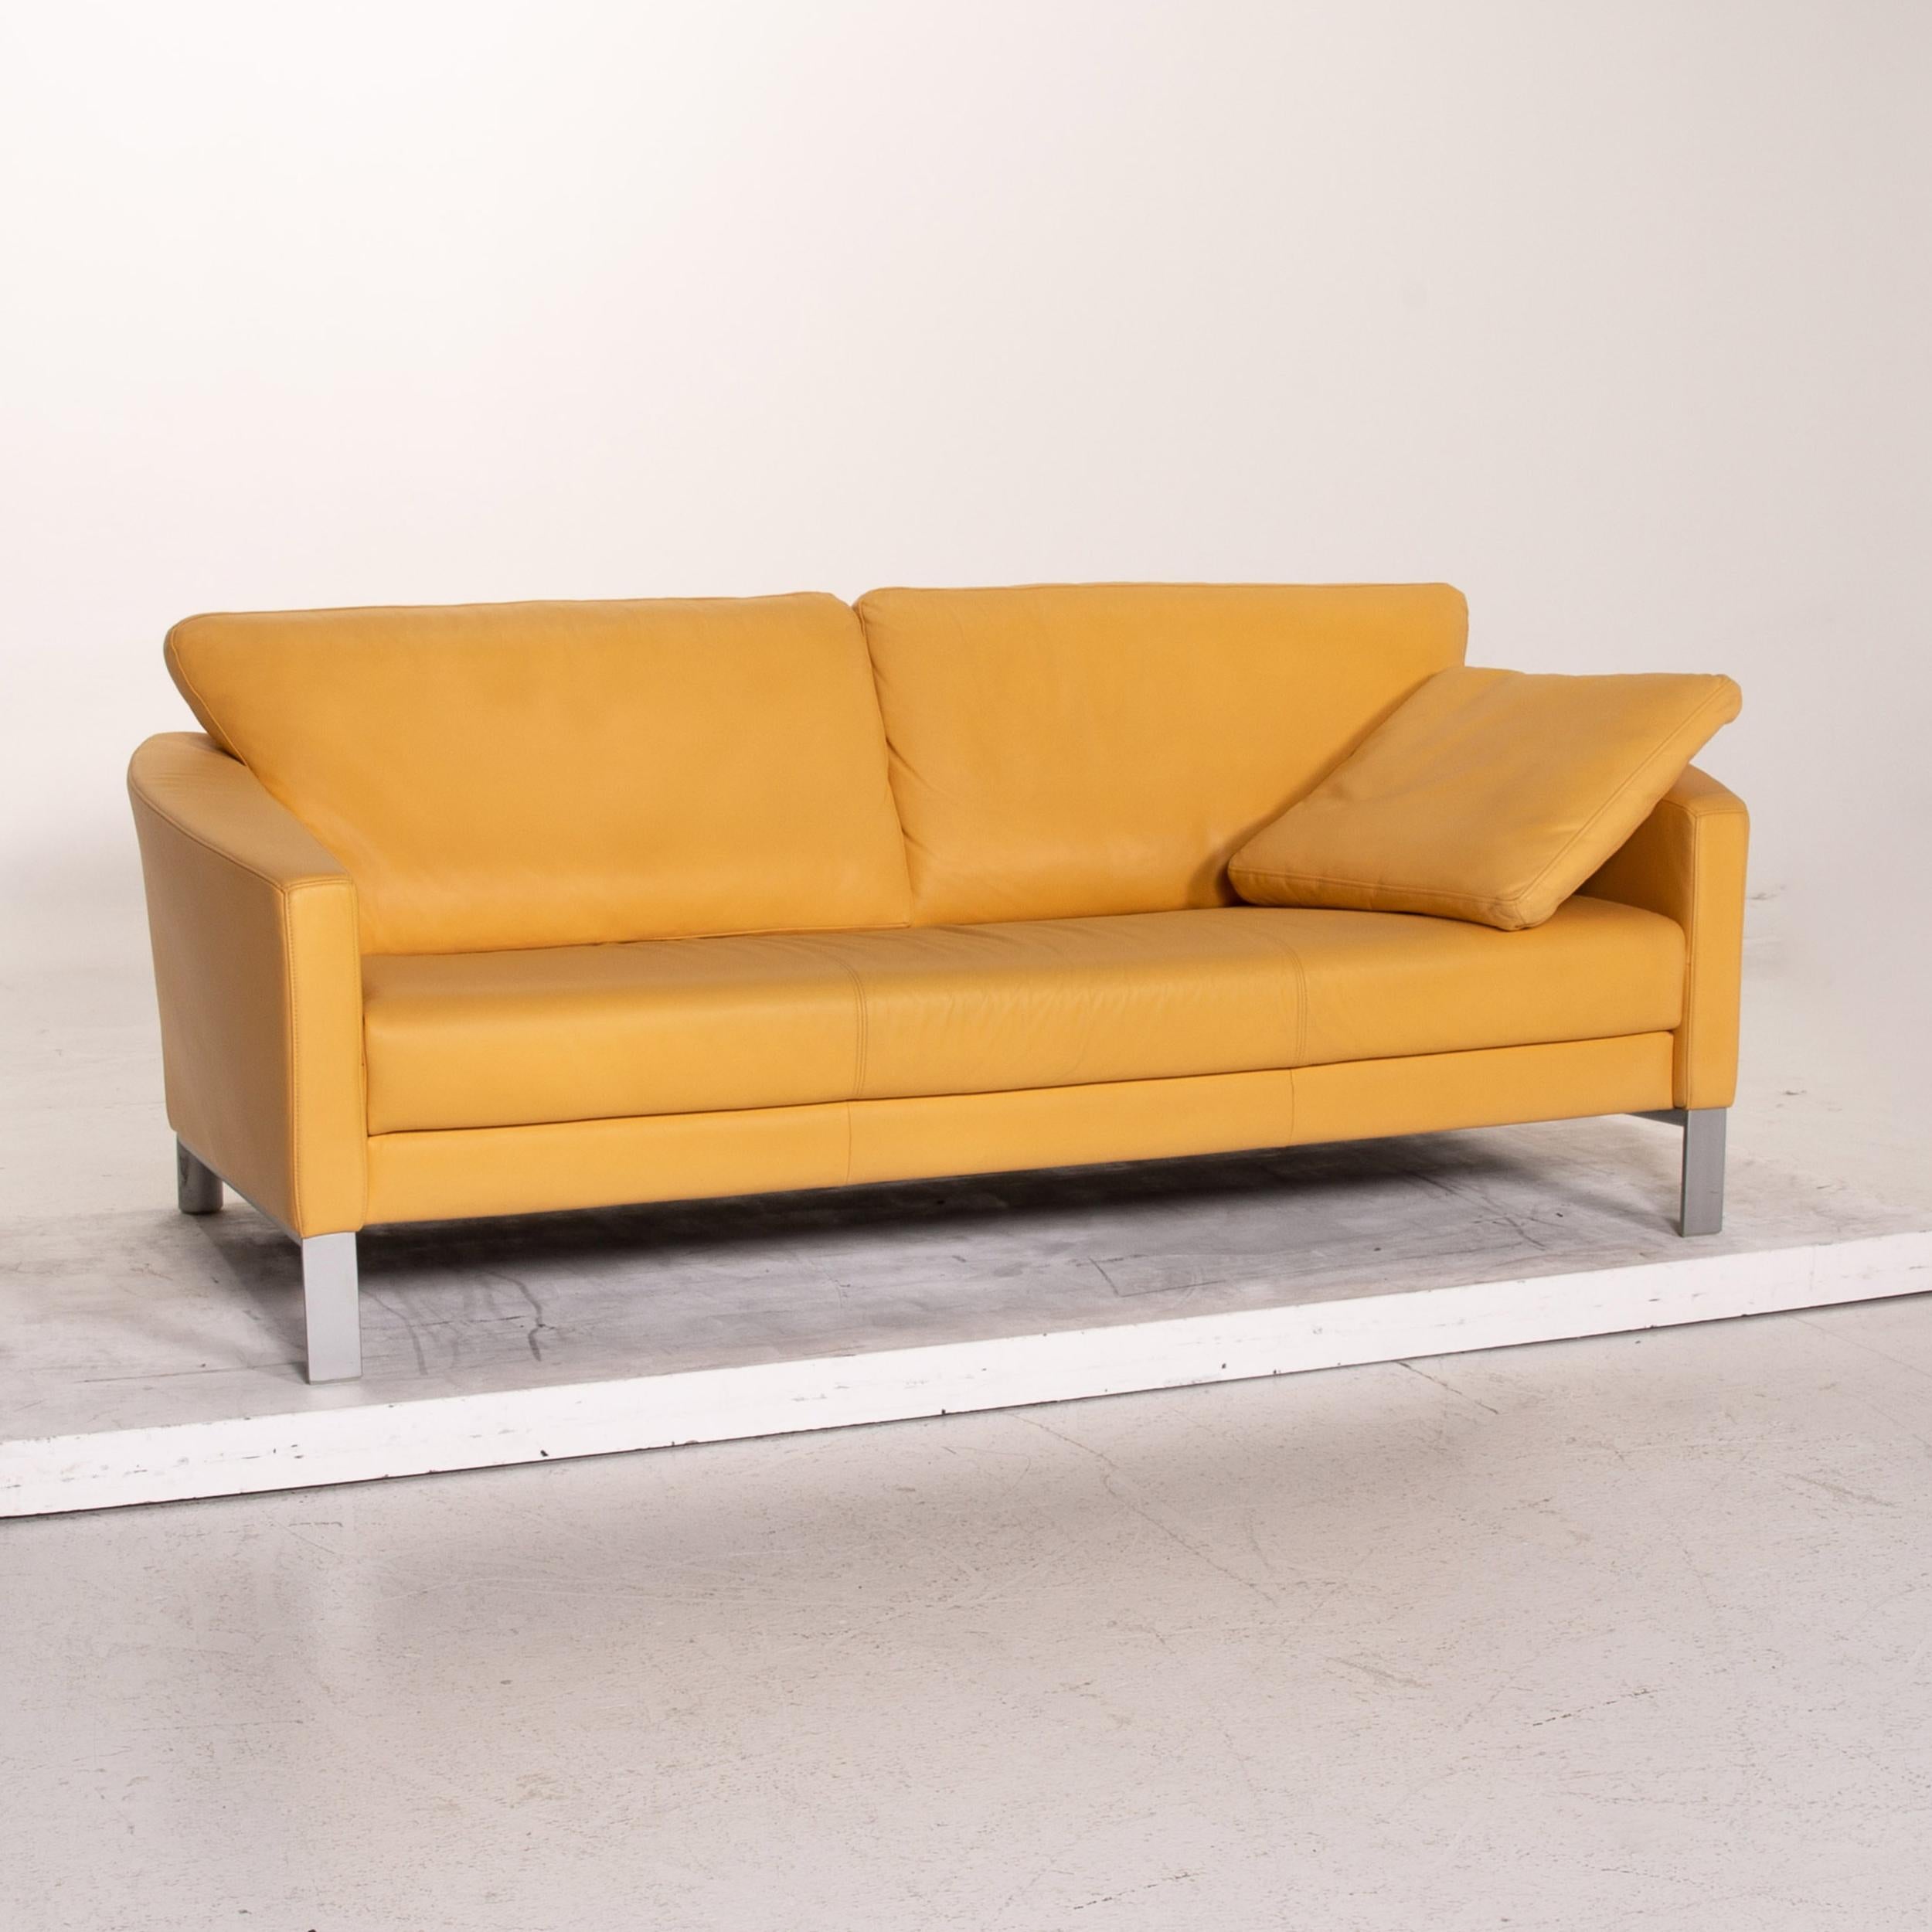 Contemporary Rolf Benz Leather Sofa Yellow Three-Seat Couch For Sale